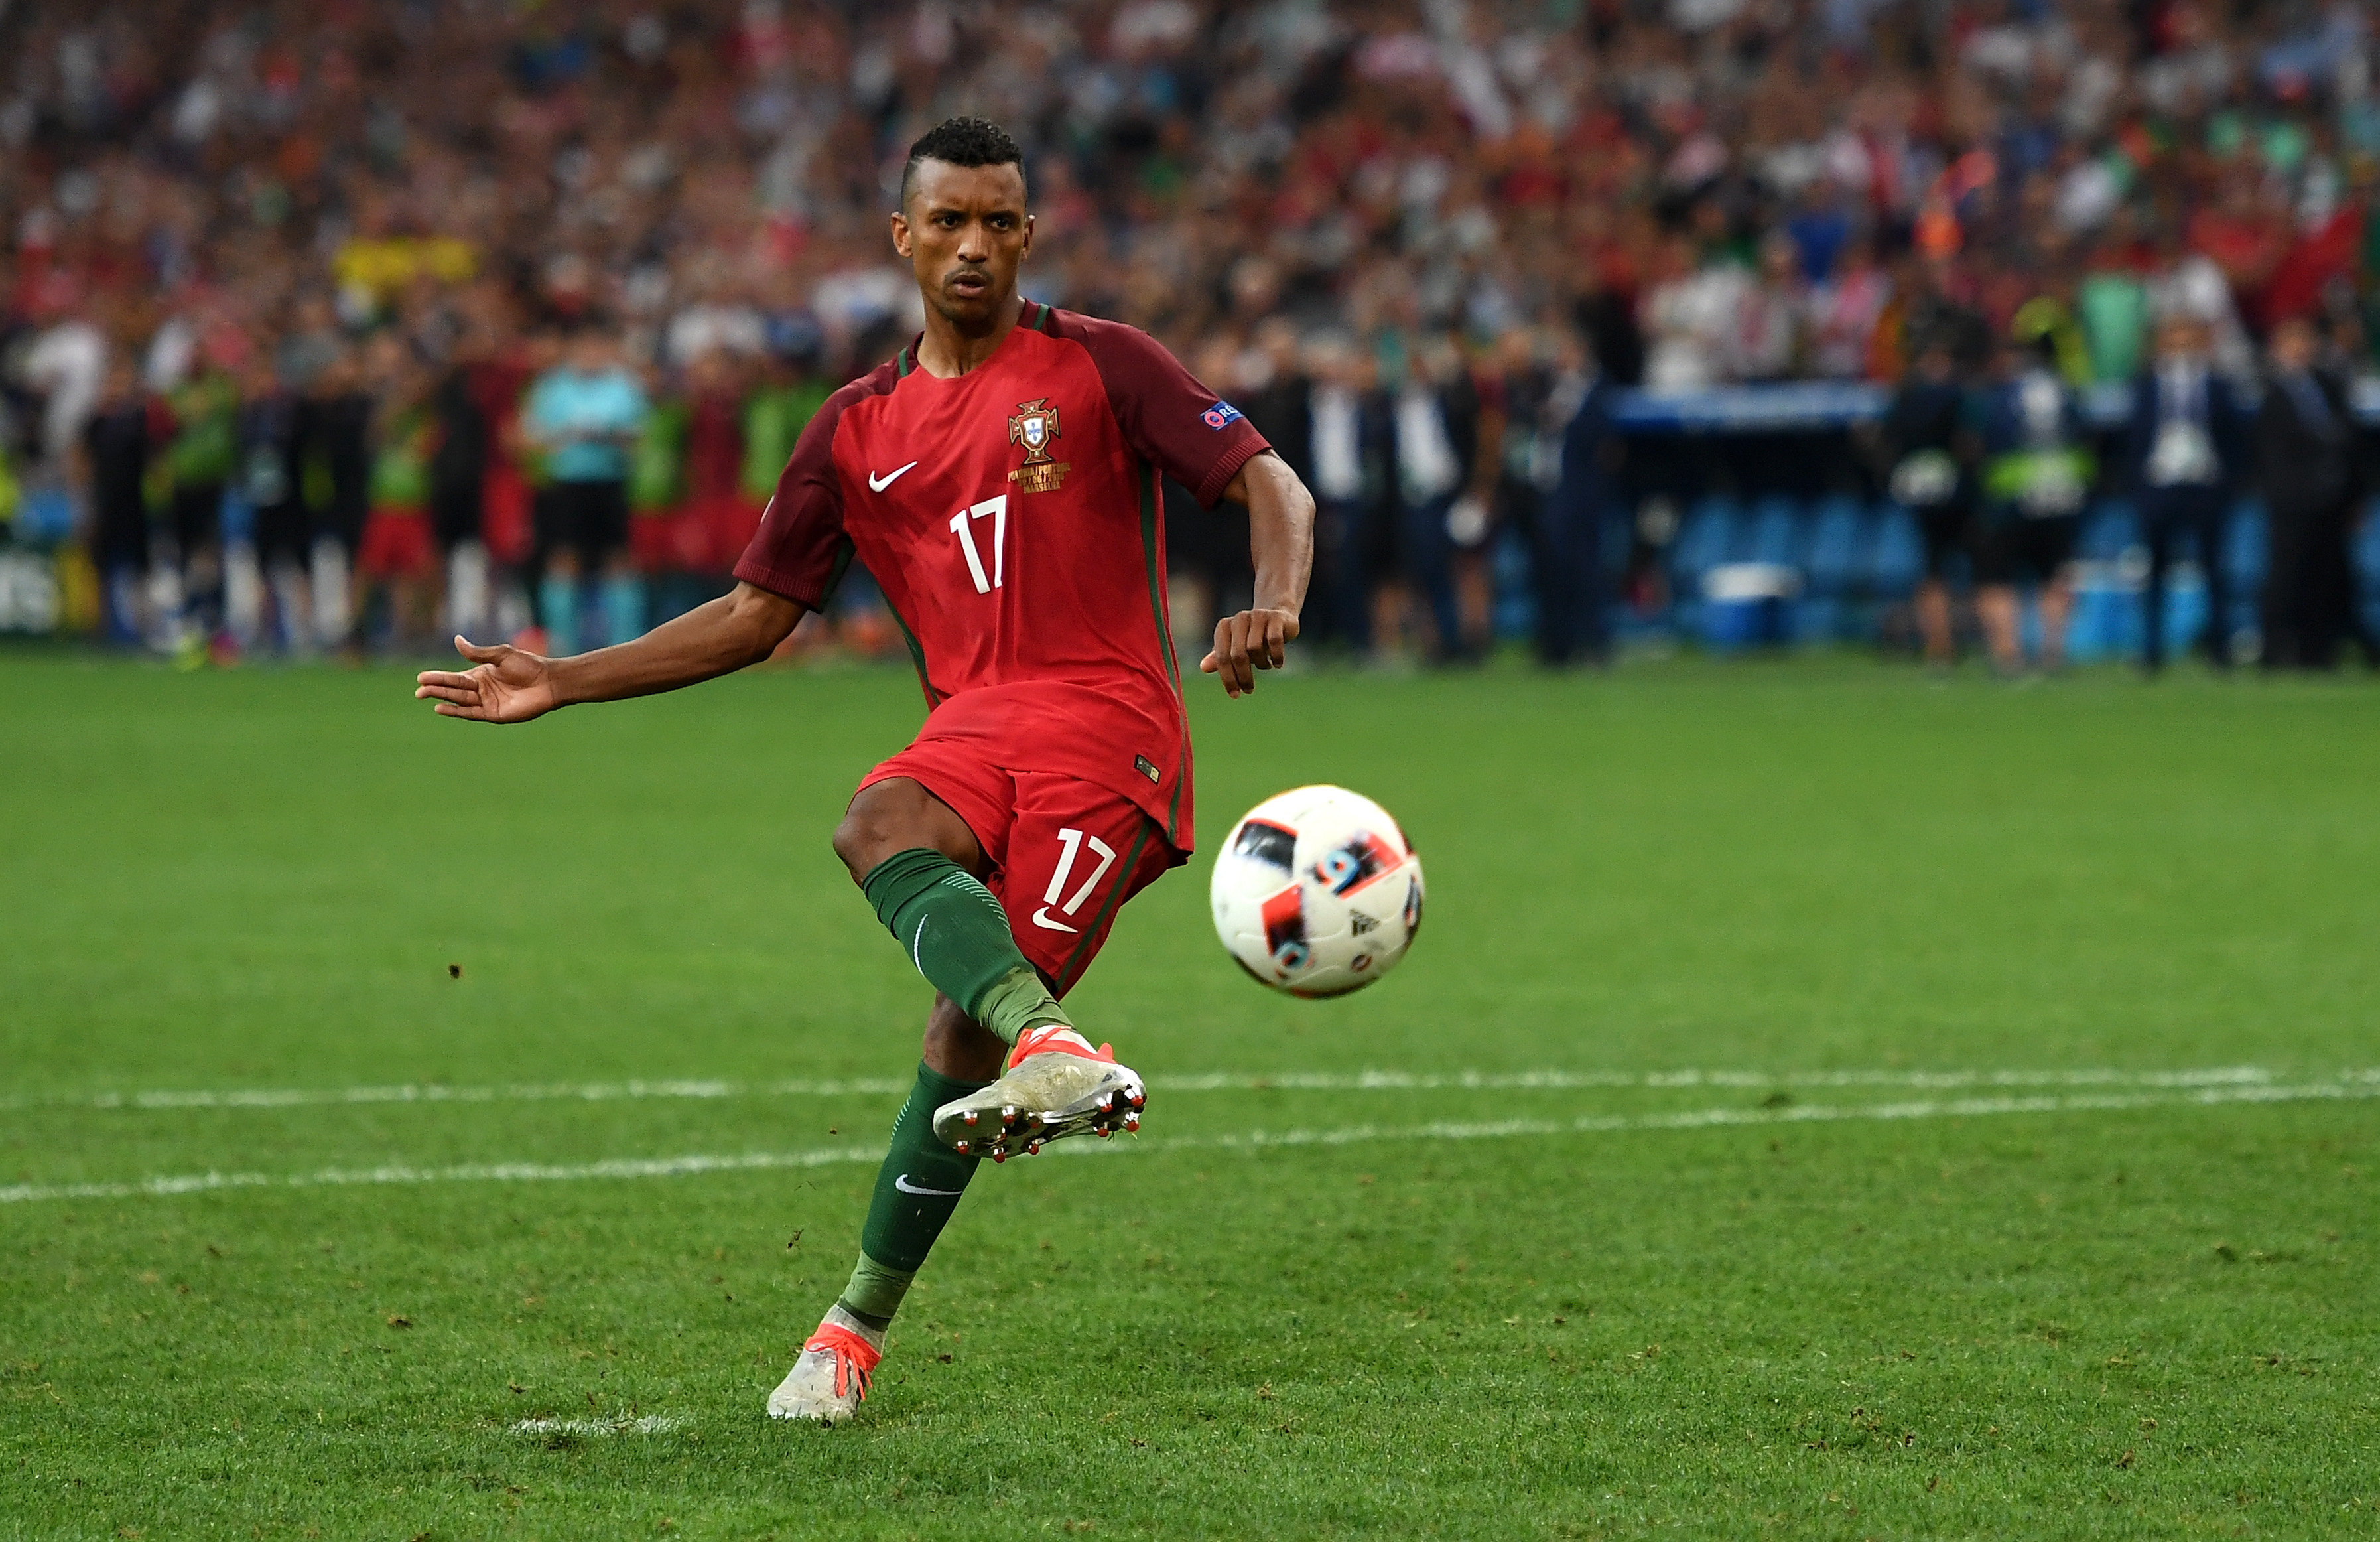 MARSEILLE, FRANCE - JUNE 30:  Nani of Portugal scores at the penalty shootout during the UEFA EURO 2016 quarter final match between Poland and Portugal at Stade Velodrome on June 30, 2016 in Marseille, France.  (Photo by Laurence Griffiths/Getty Images)